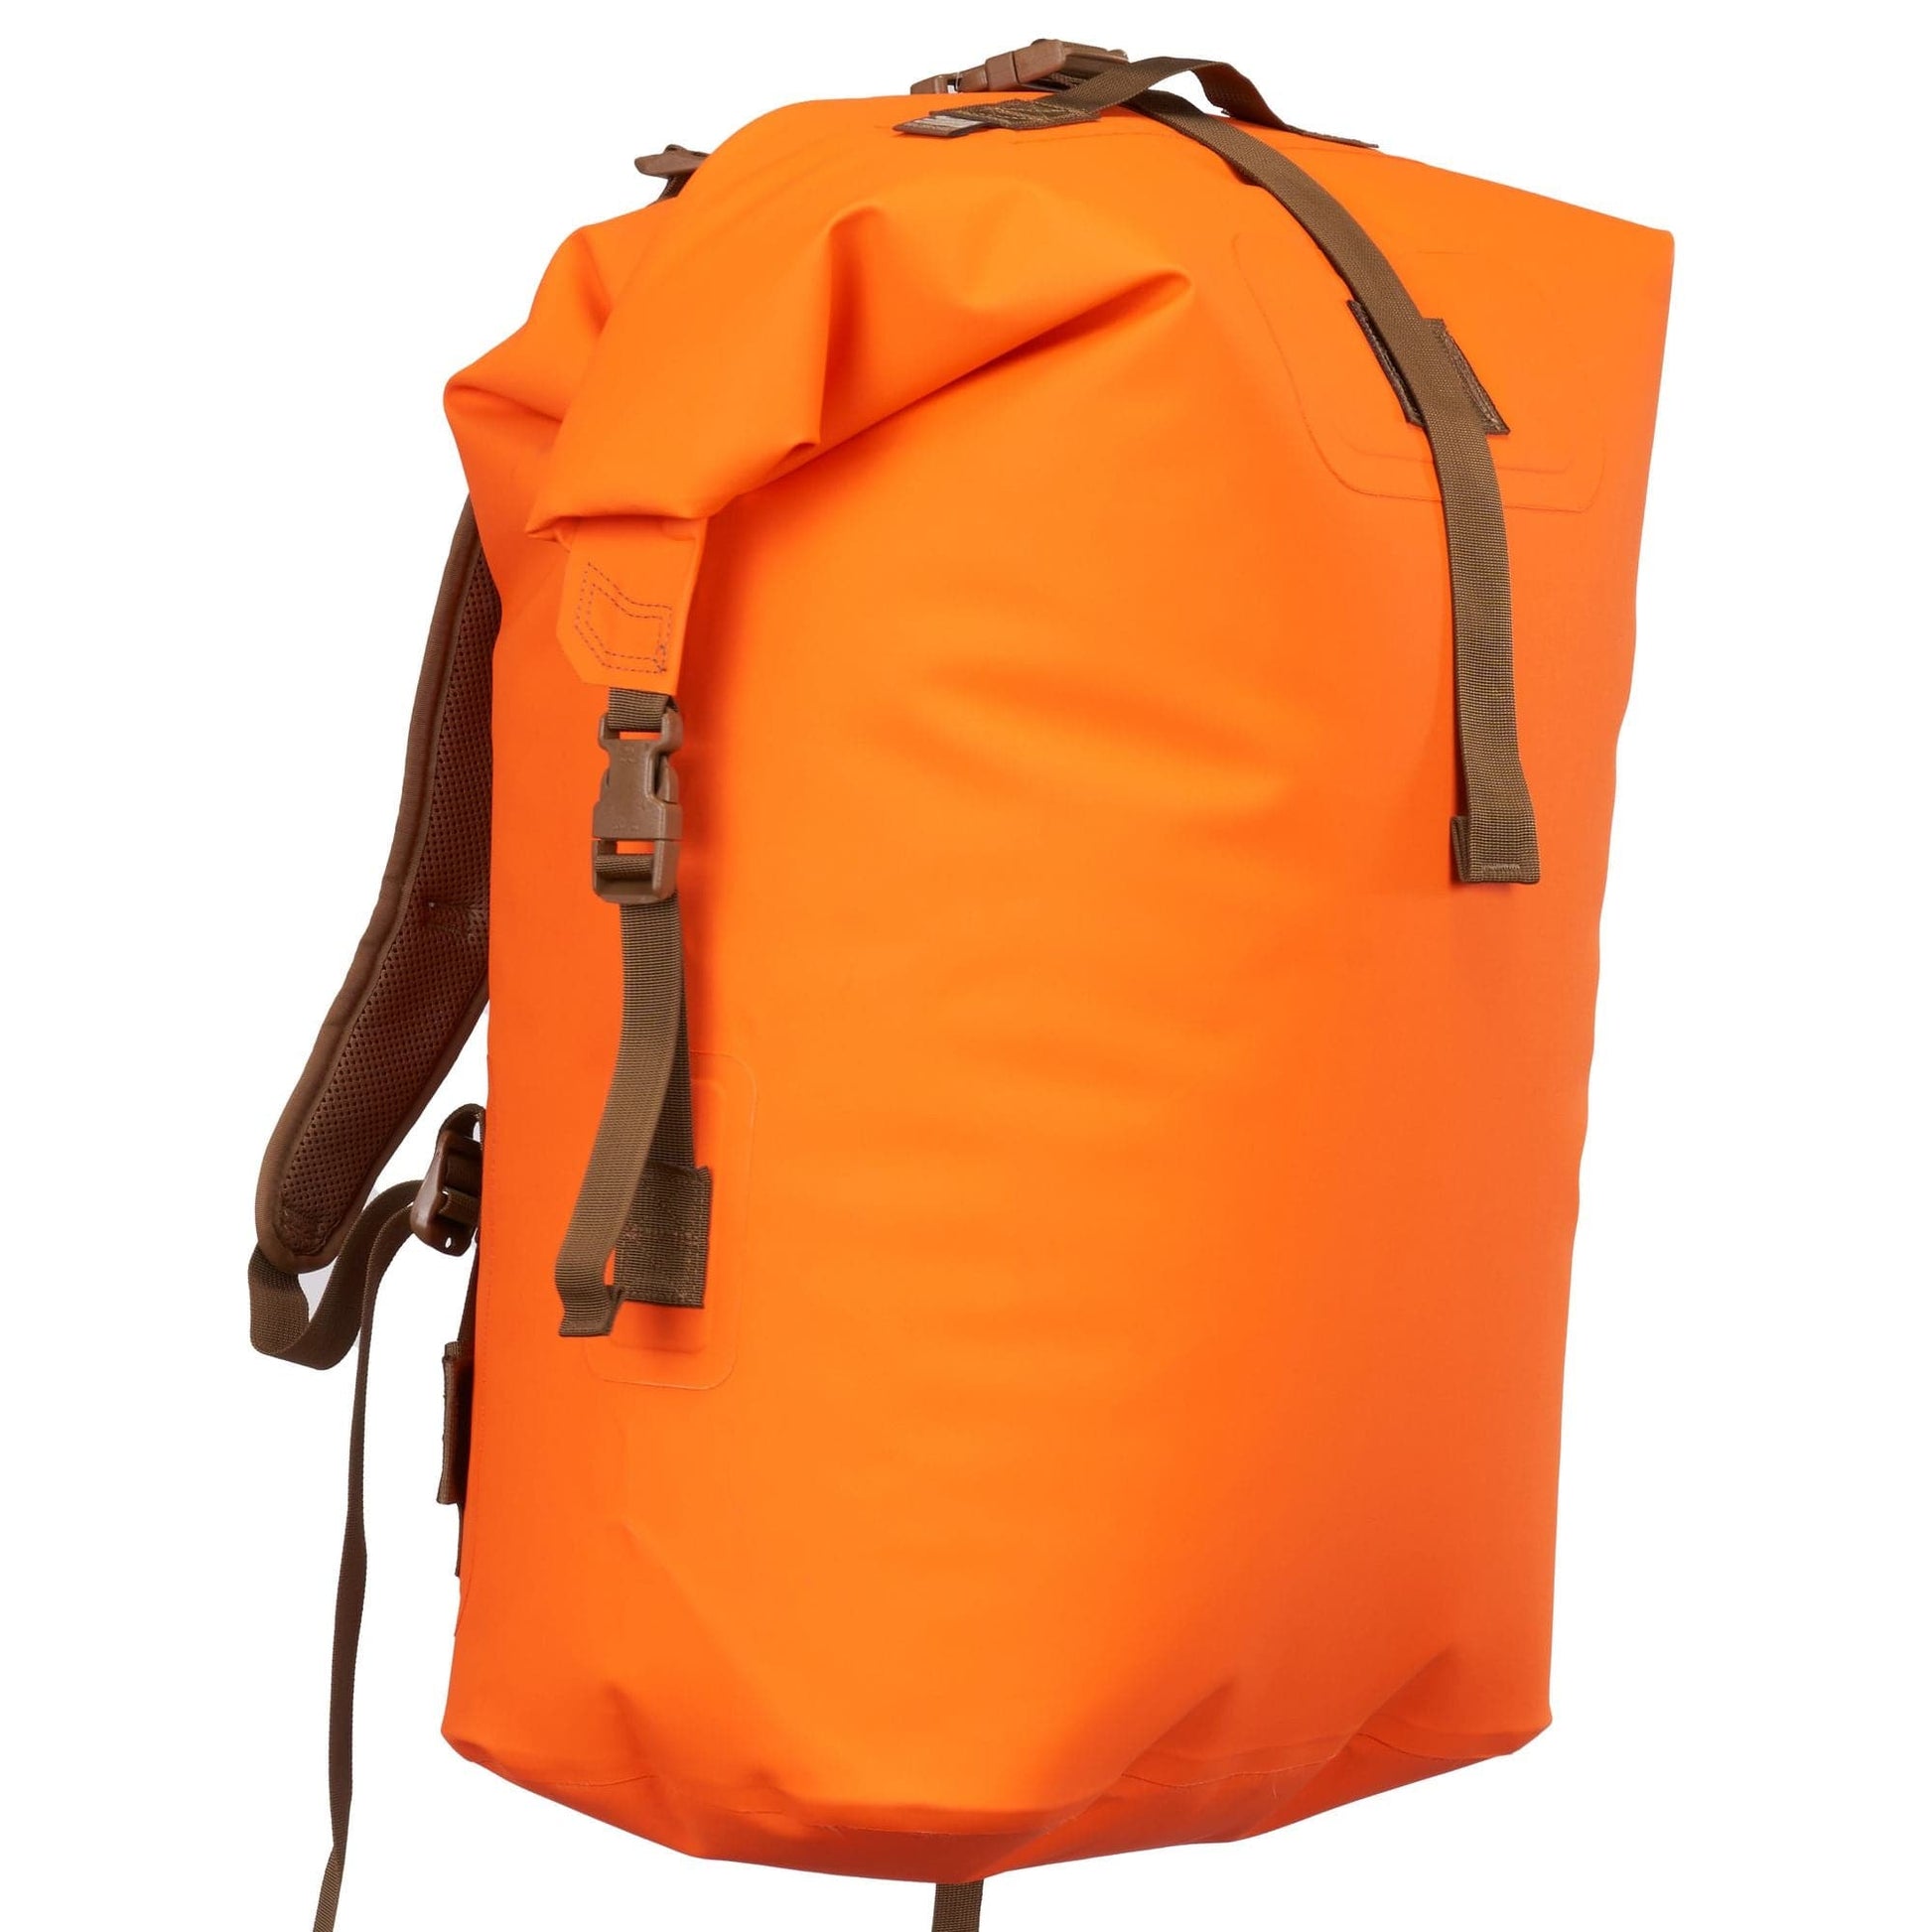 Featuring the Westwater Drypack dry bag manufactured by Watershed shown here from a sixth angle.